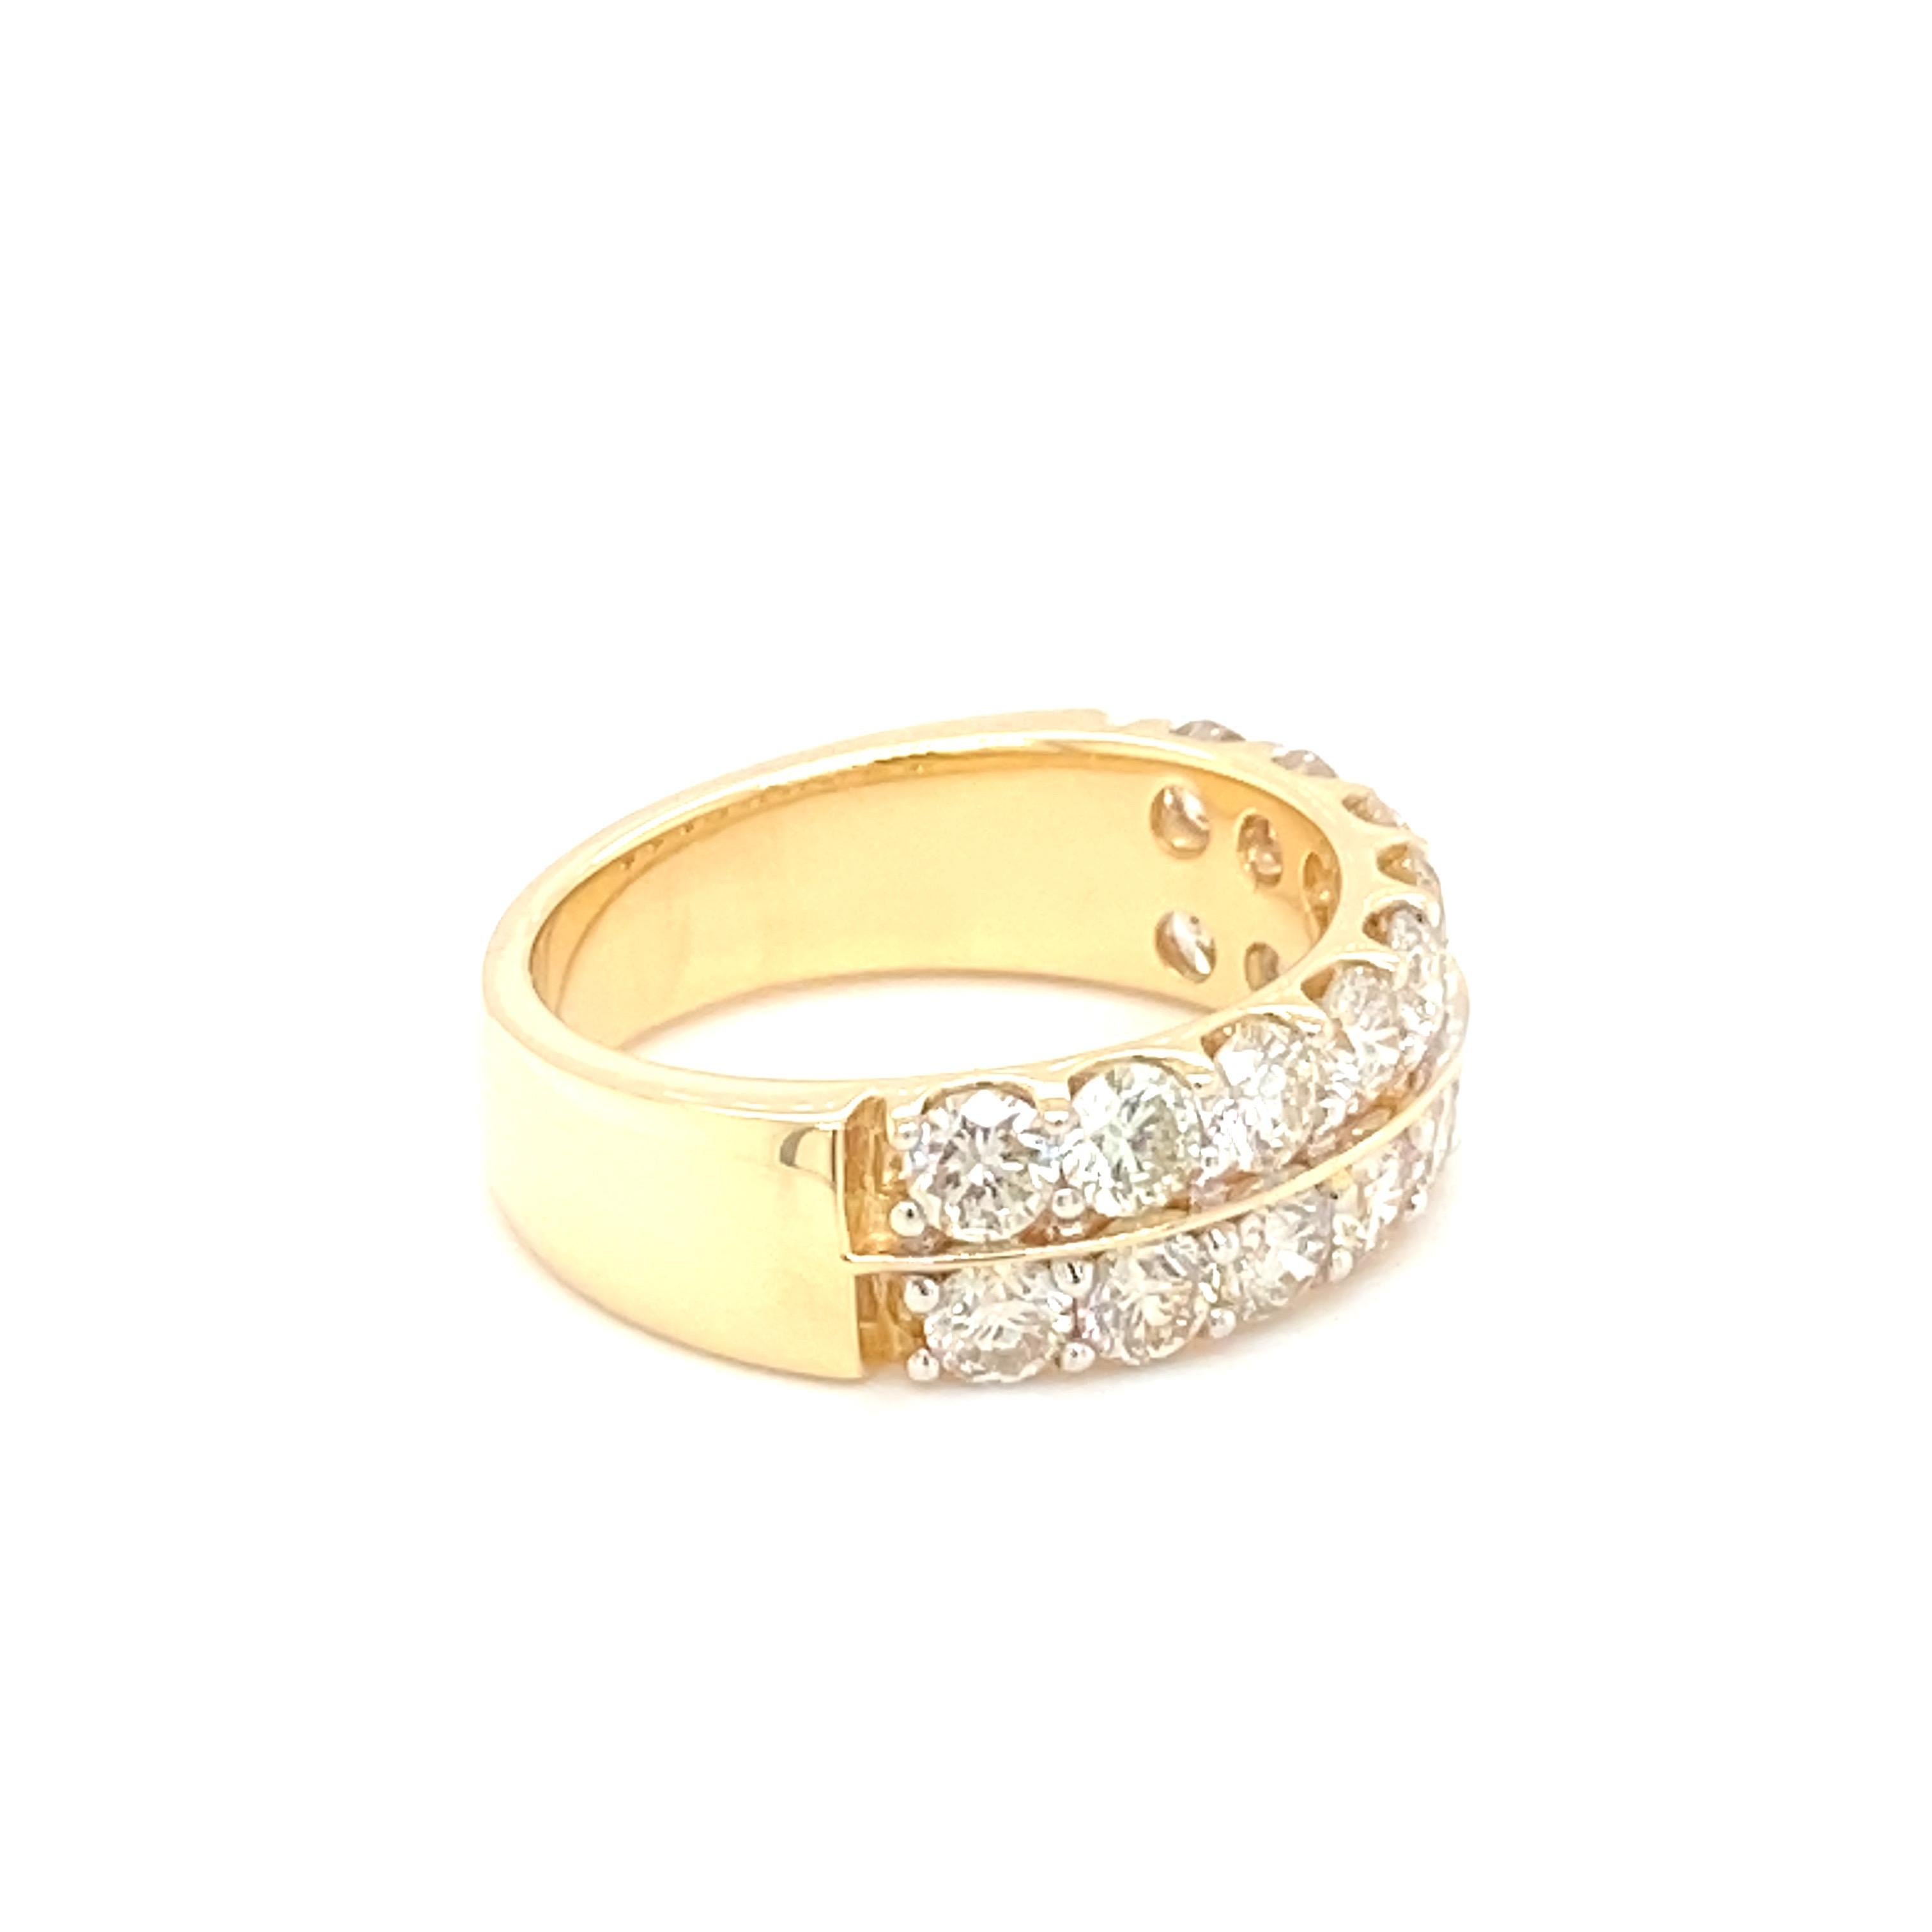 3.00 Carat Diamond Yellow Gold Band Ring In New Condition For Sale In Trumbull, CT